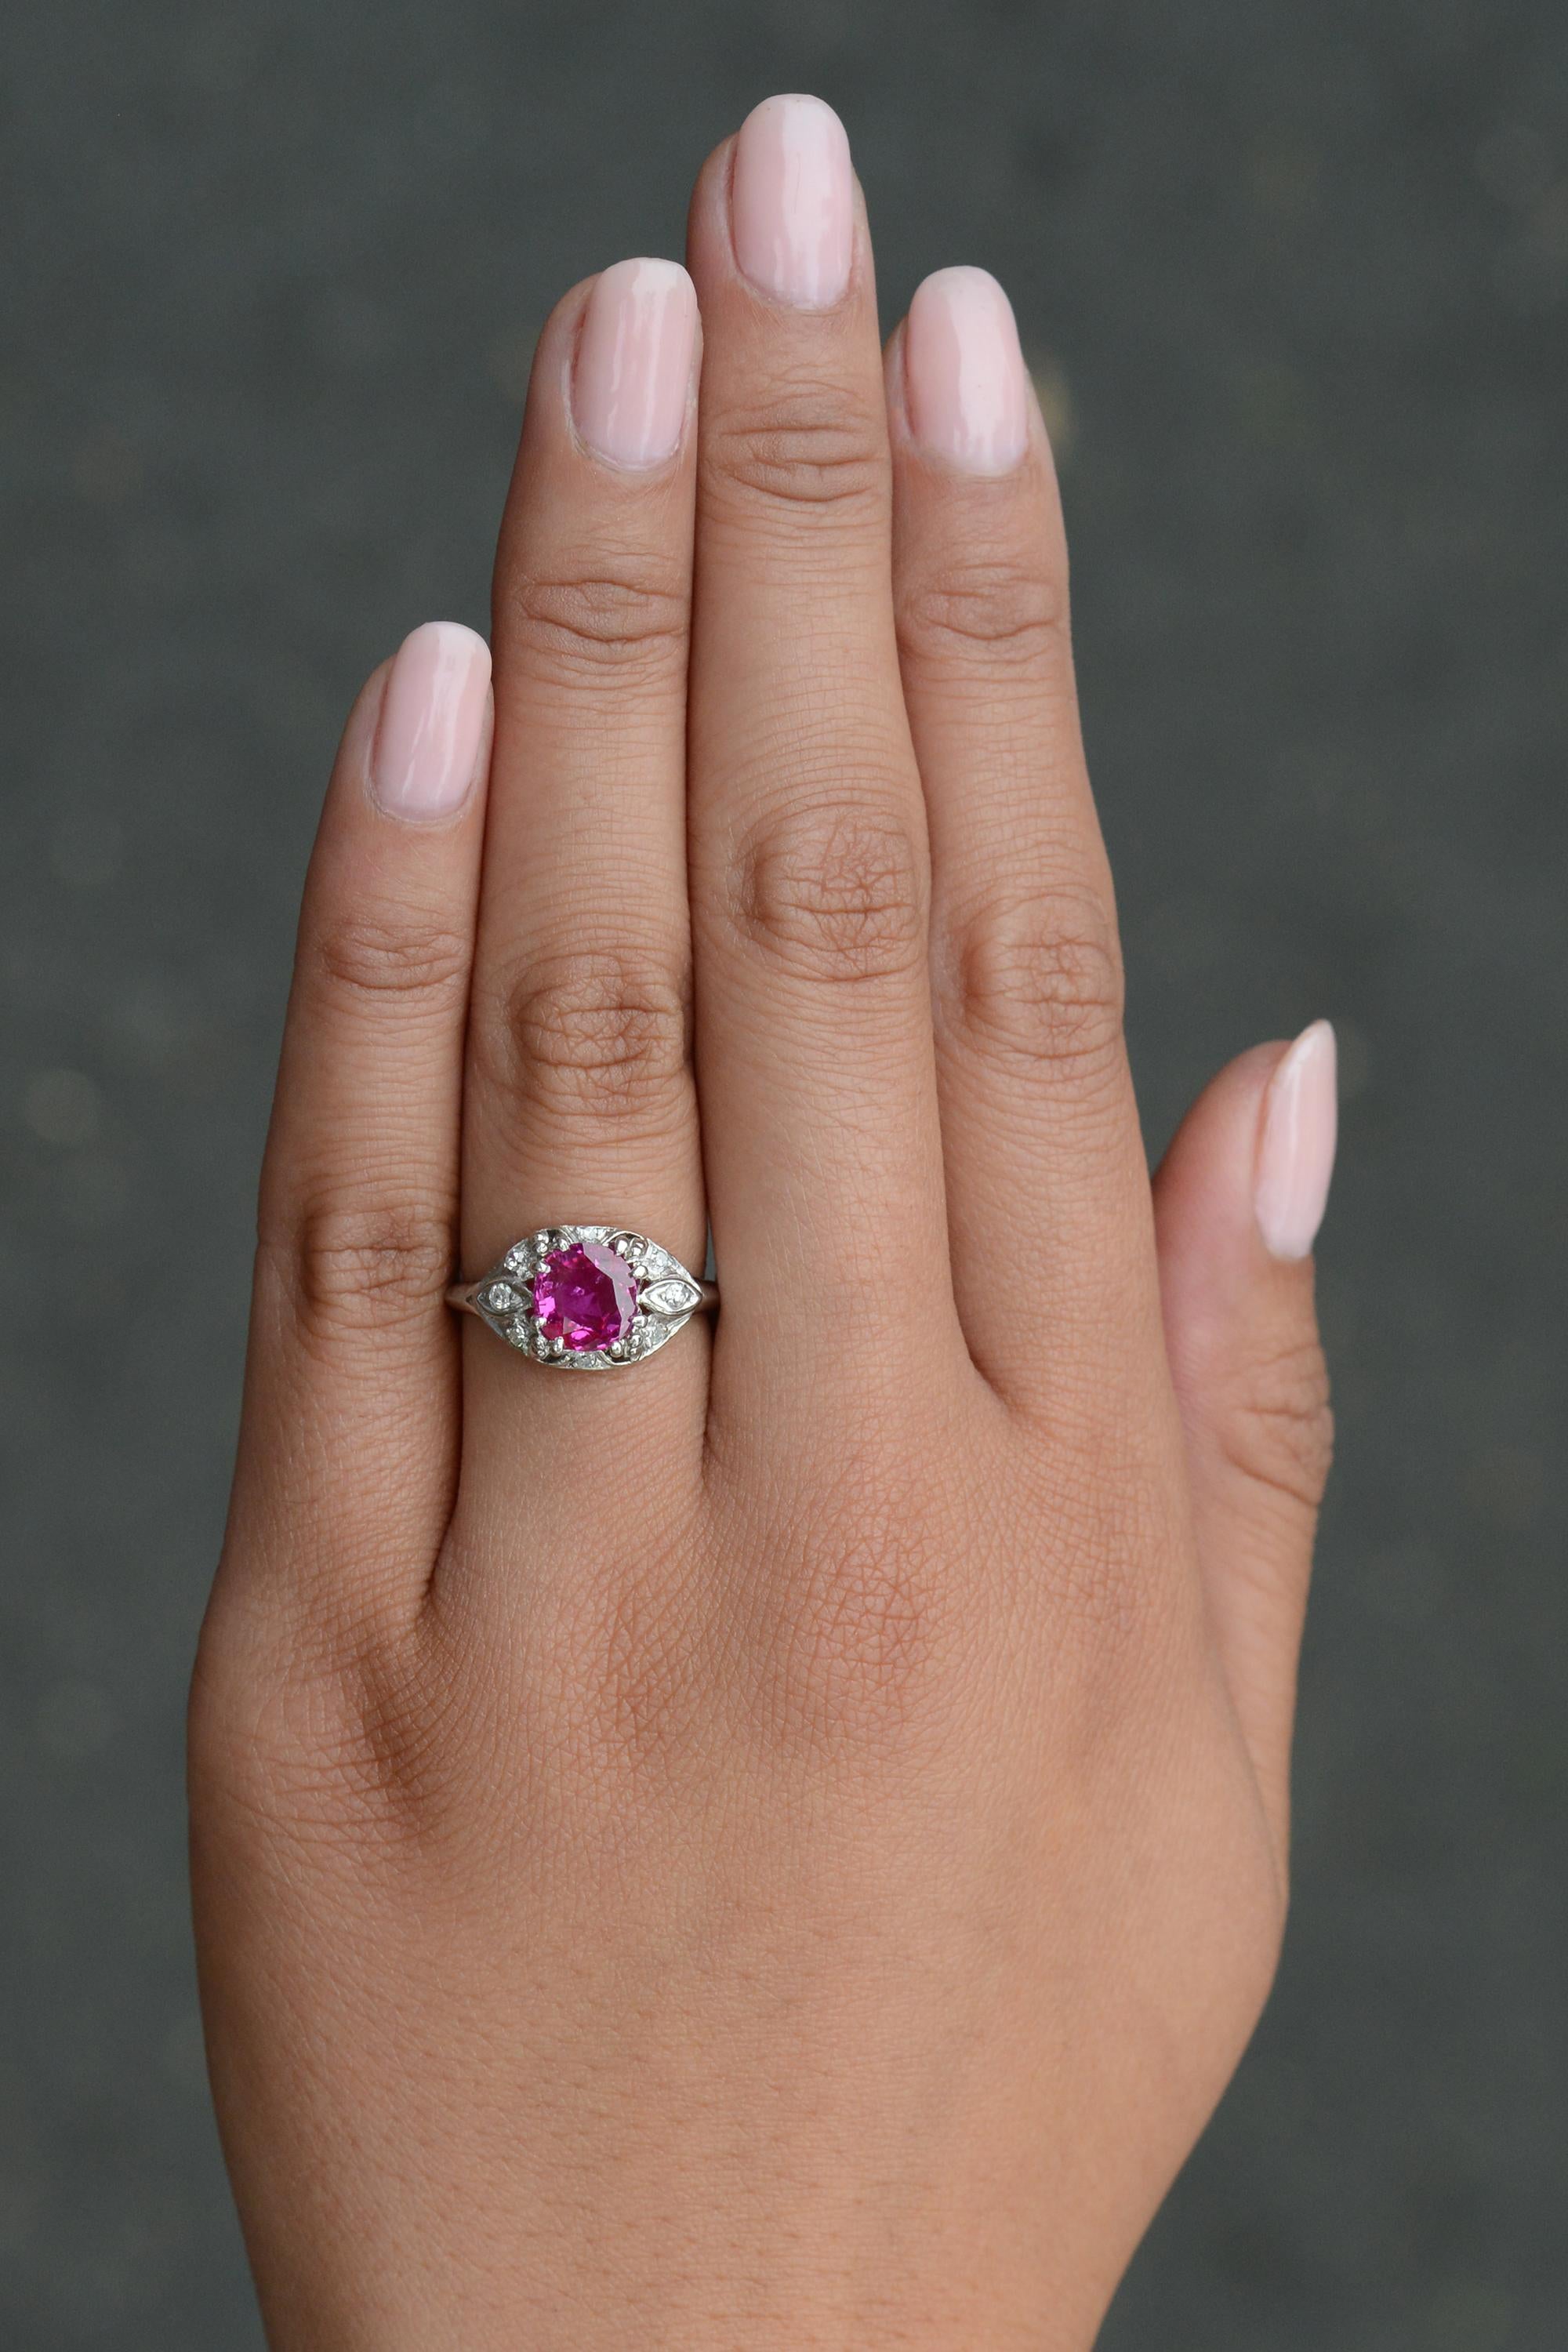 This no heat ruby engagement ring is quite the beauty and one of the rarer treasures in our collection. Unheated rubies make up less than 1% of all gem-quality rubies and one displaying this vivid color, saturation, carat weight, origin and GIA